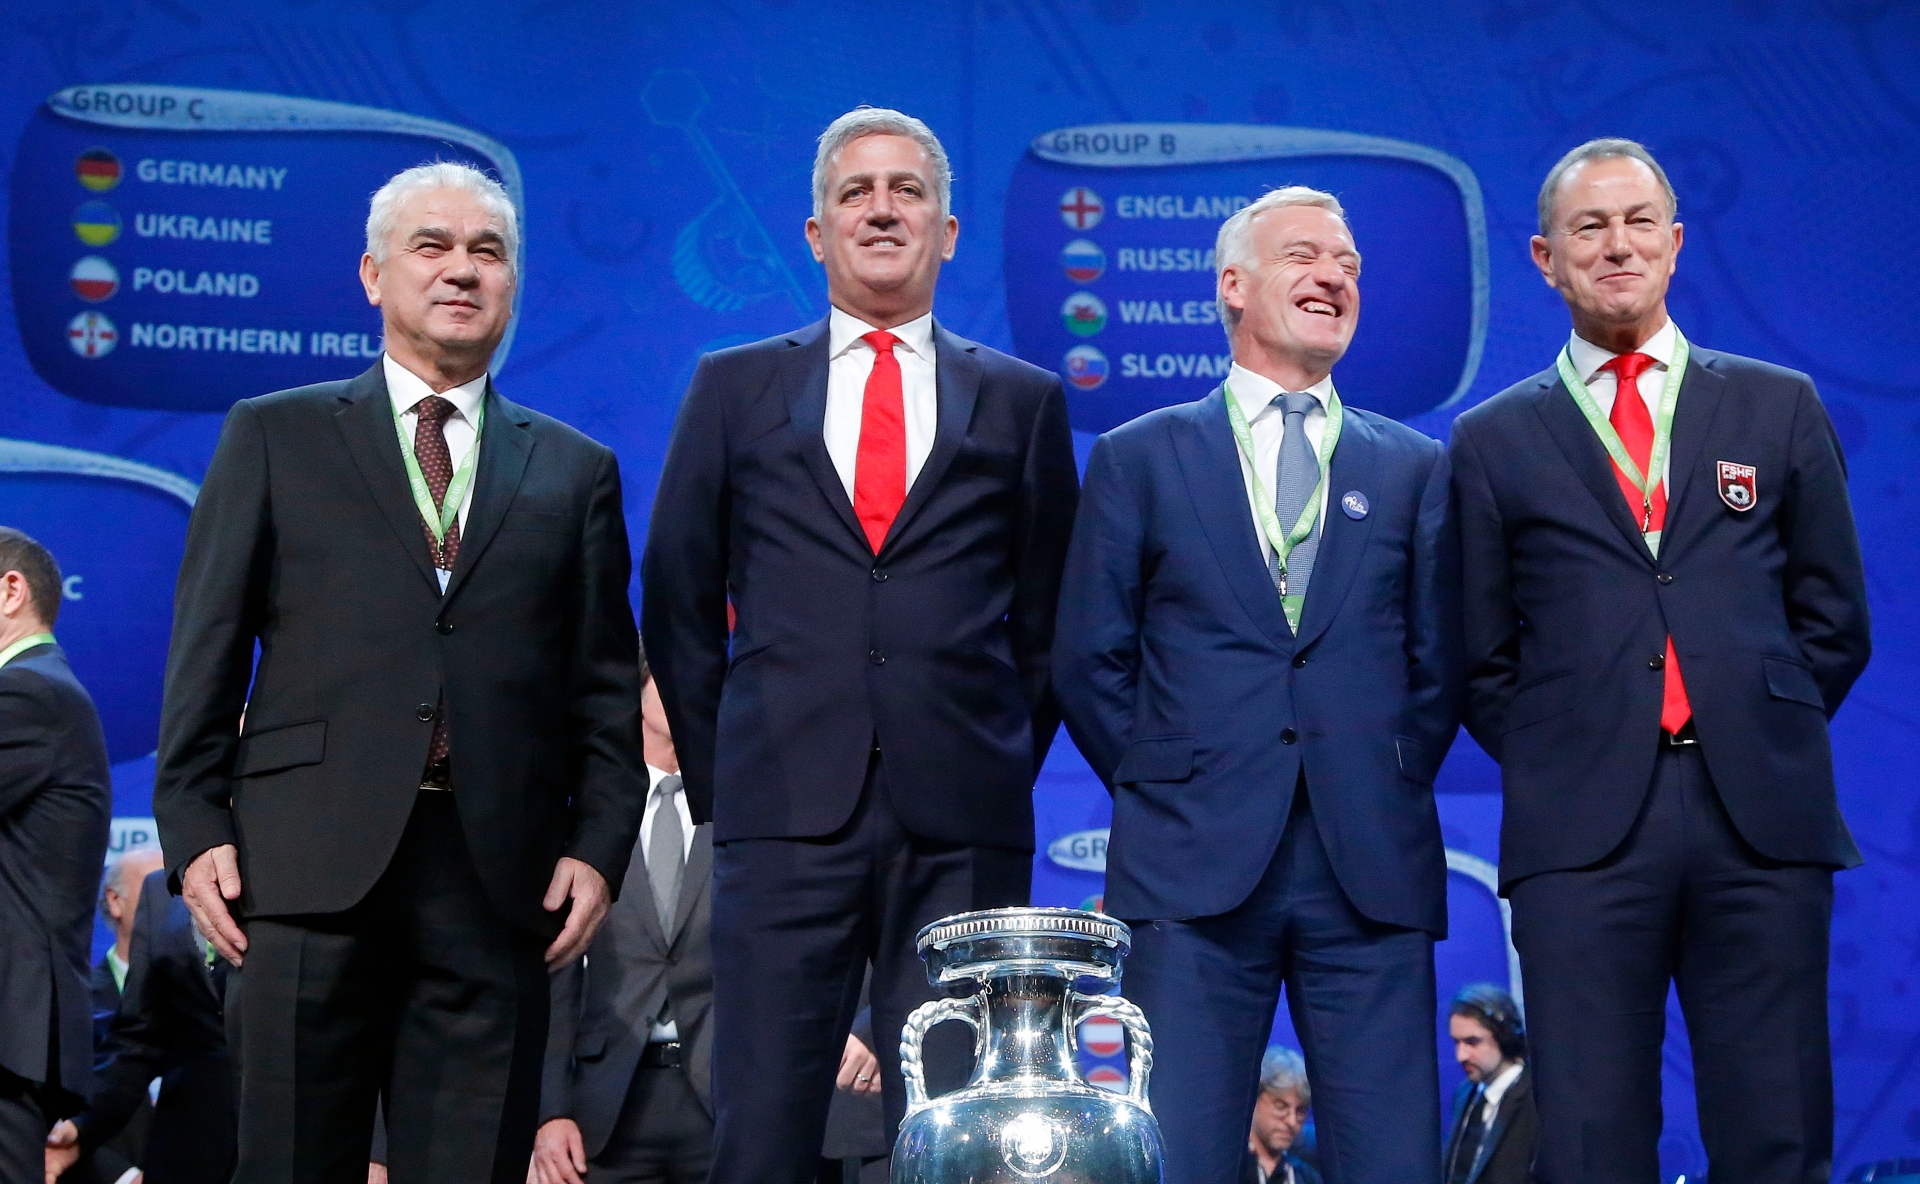 The coaches of teams drawn in group A, from left: Romanian coach Anghel Iordanescu, Vladimir Petkovic, the coach of Switzerland, French soccer team coach Didier Deschamp and Gianni de Biasi, the coach of Albania pose for a photo after the Euro 2016 soccer championships draw in Paris Saturday, Dec. 12, 2015.  (AP Photo/Michel Euler) France Euro 2016 Draw Soccer